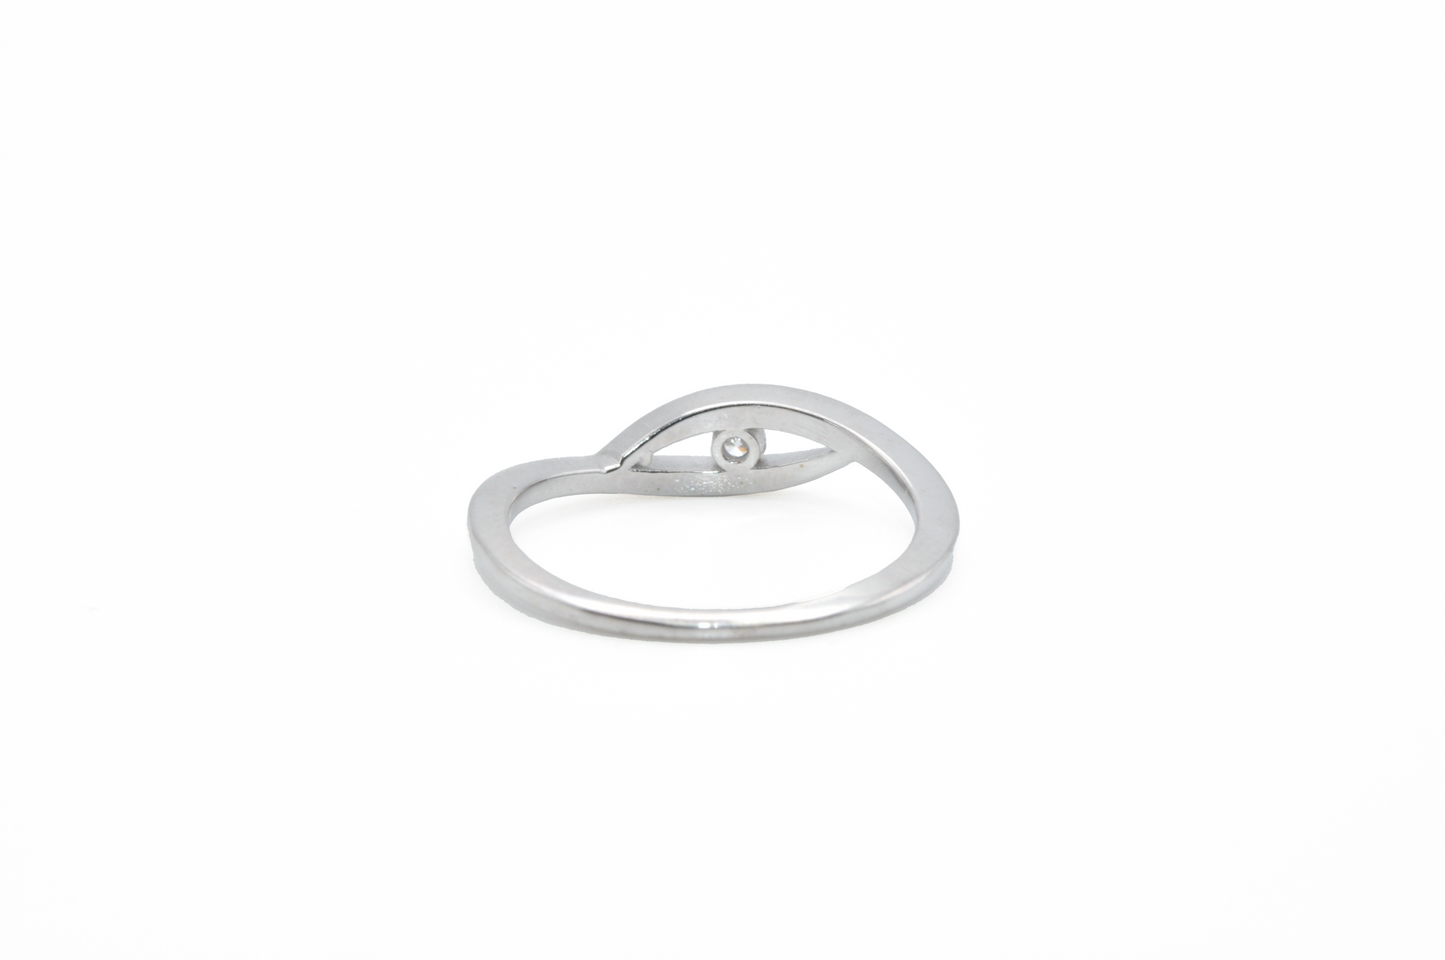 White Gold Eye Ring with a Diamond Accent Stone